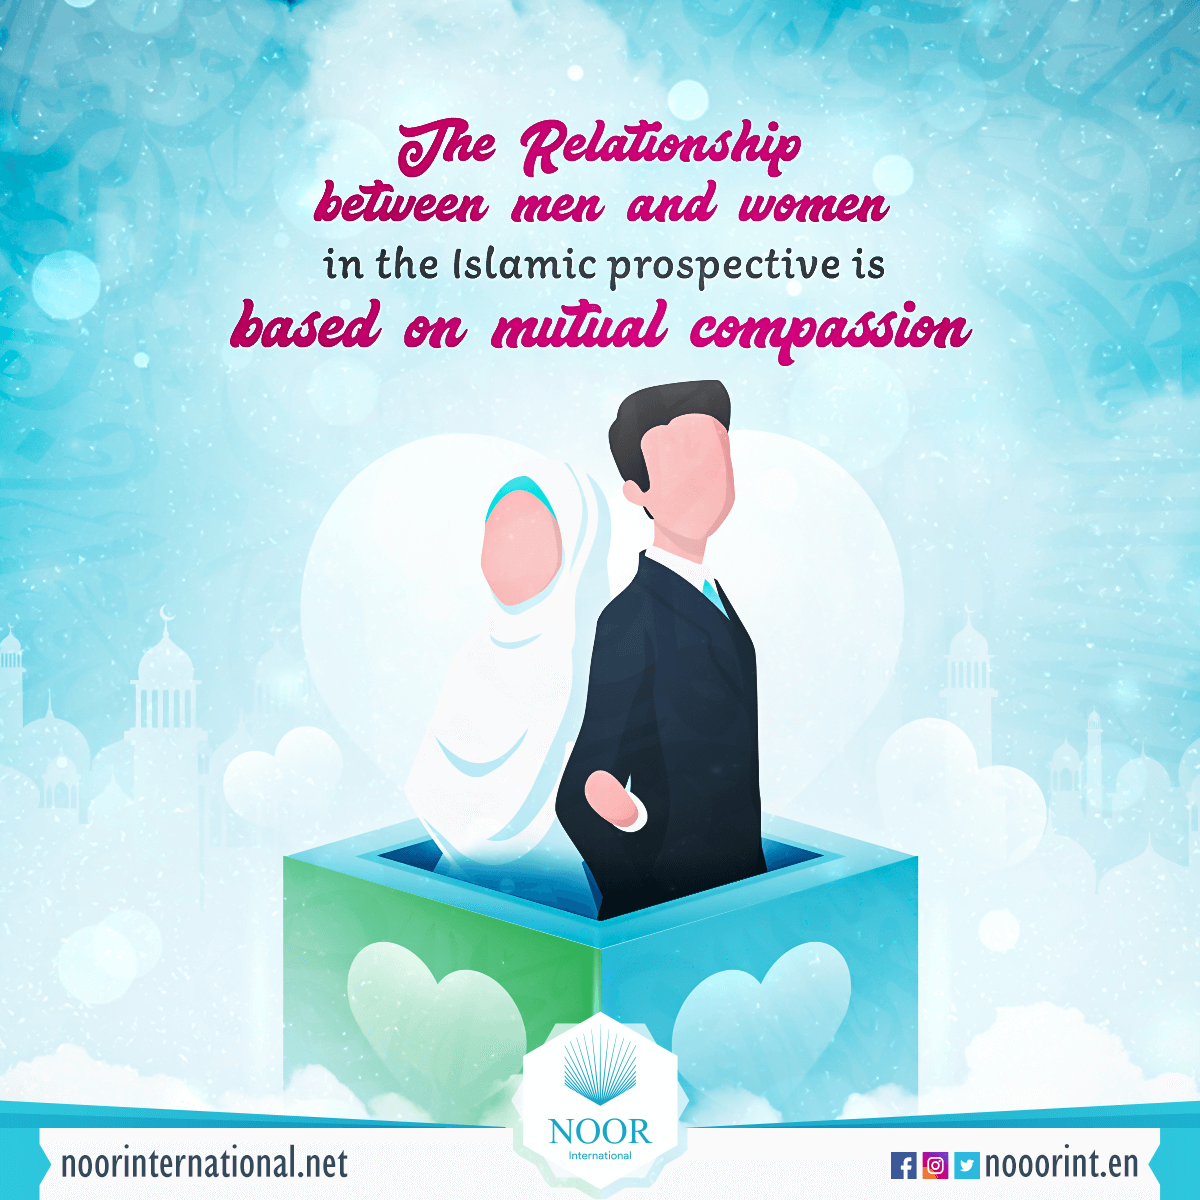 The relationship between men and women in the Islamic prospective is based on mutual compassion and mercy